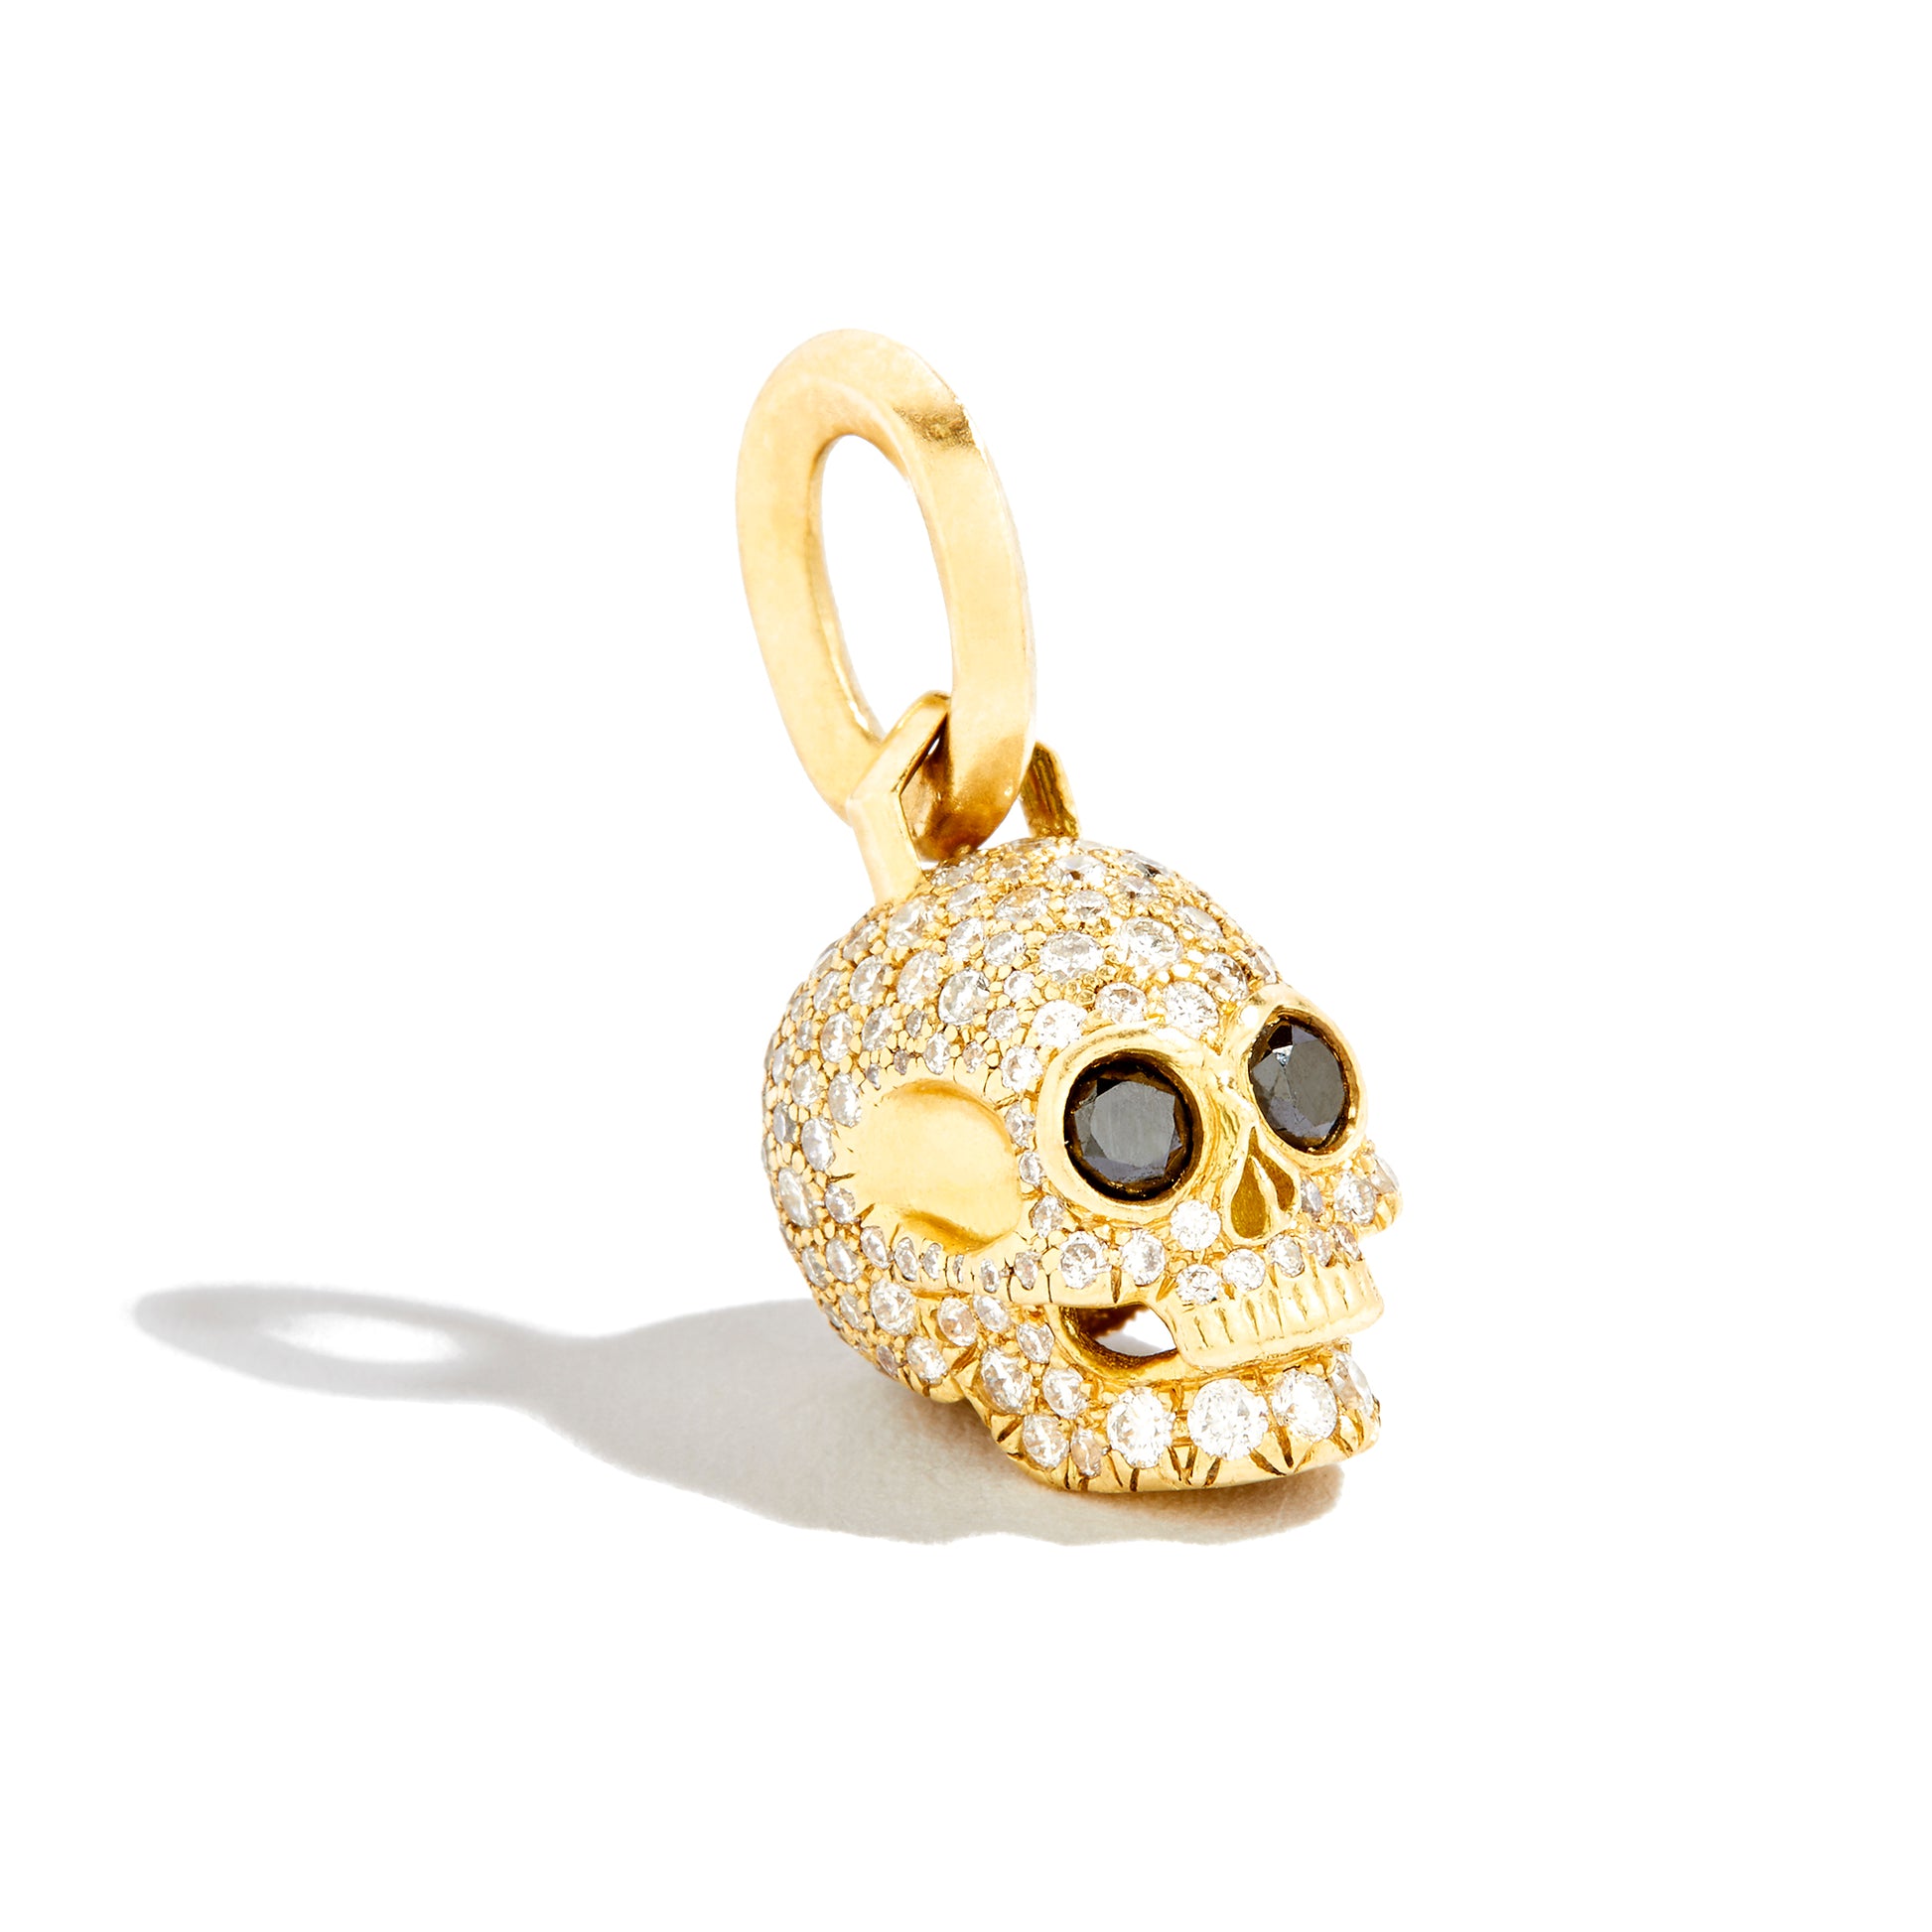 All Over pavé diamond and yellow gold skull pendant with black diamond eyes on white background